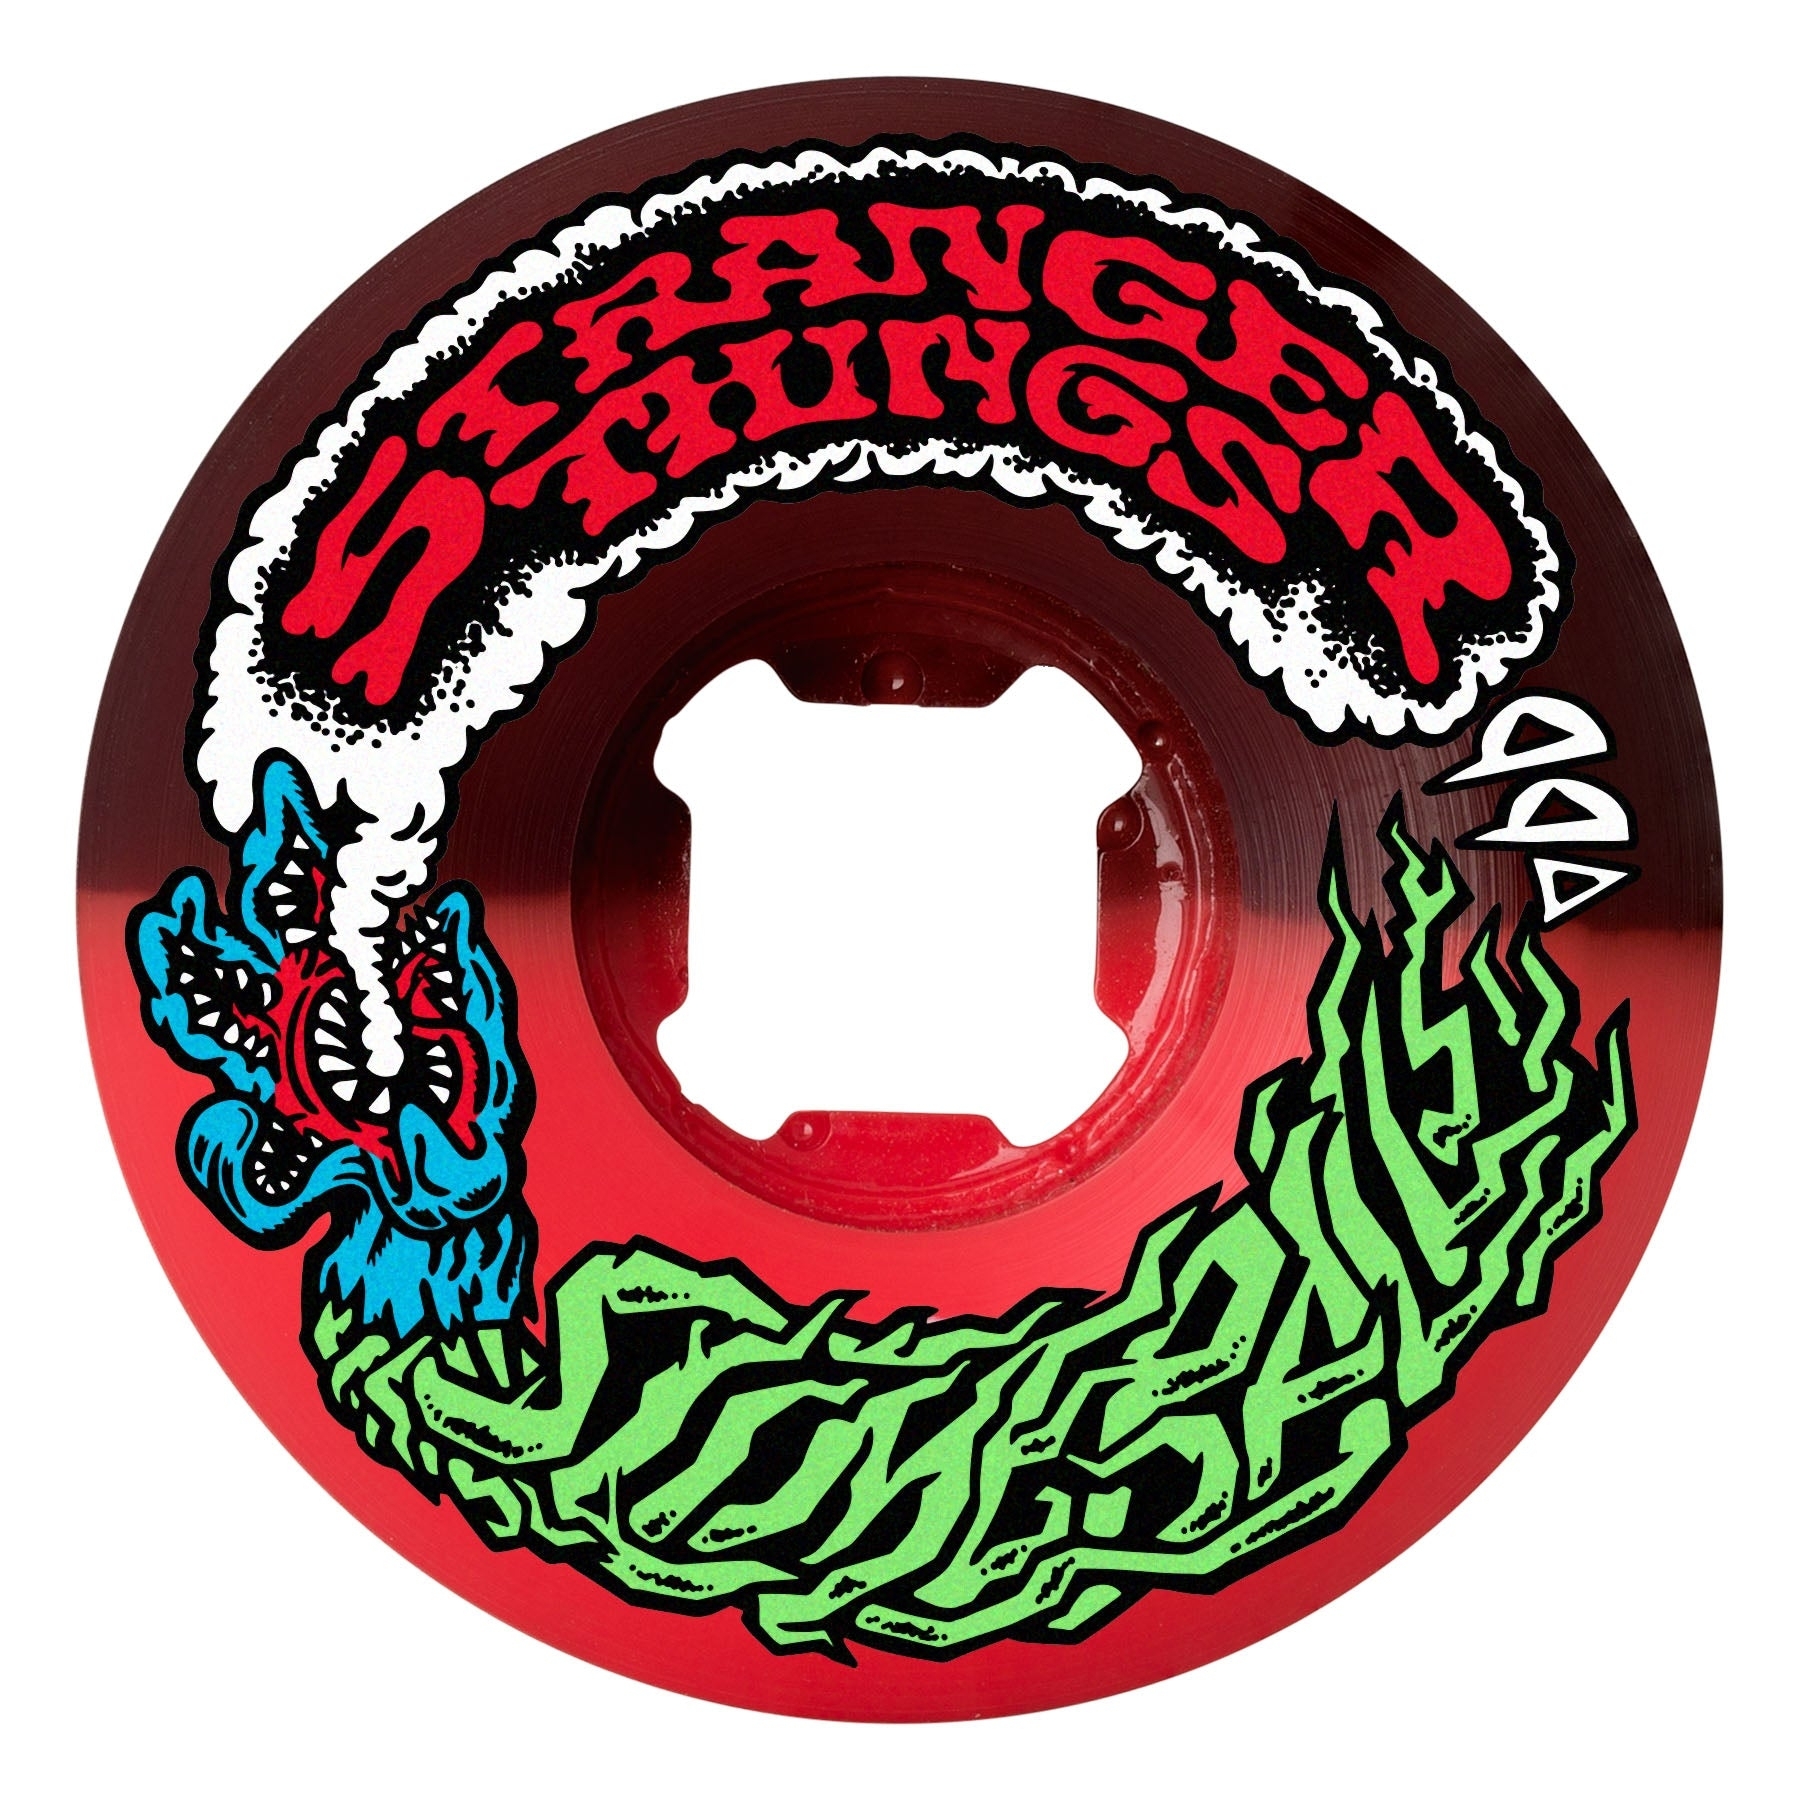 Slime Balls Stranger Things Vomits 99A (Red/Black) Wheels at Switch  Skateboarding